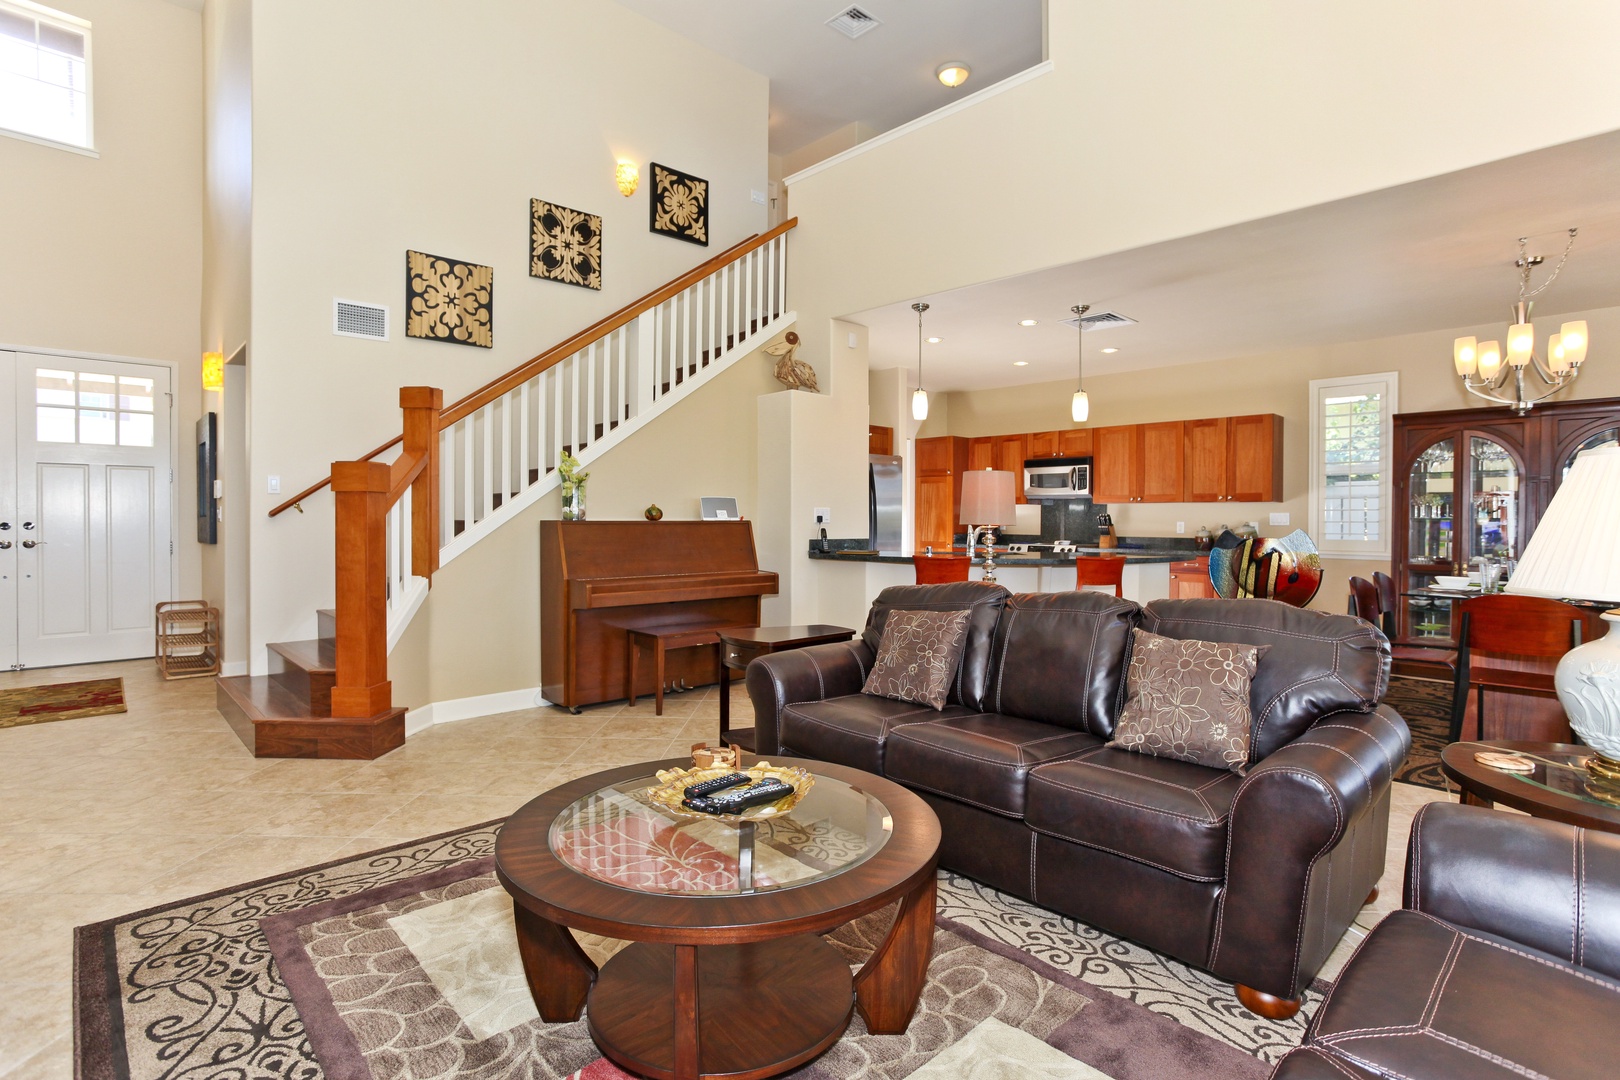 Kapolei Vacation Rentals, Ko Olina Kai Estate #20 - There's plenty of seating for game night! The stairs are located near the living area.